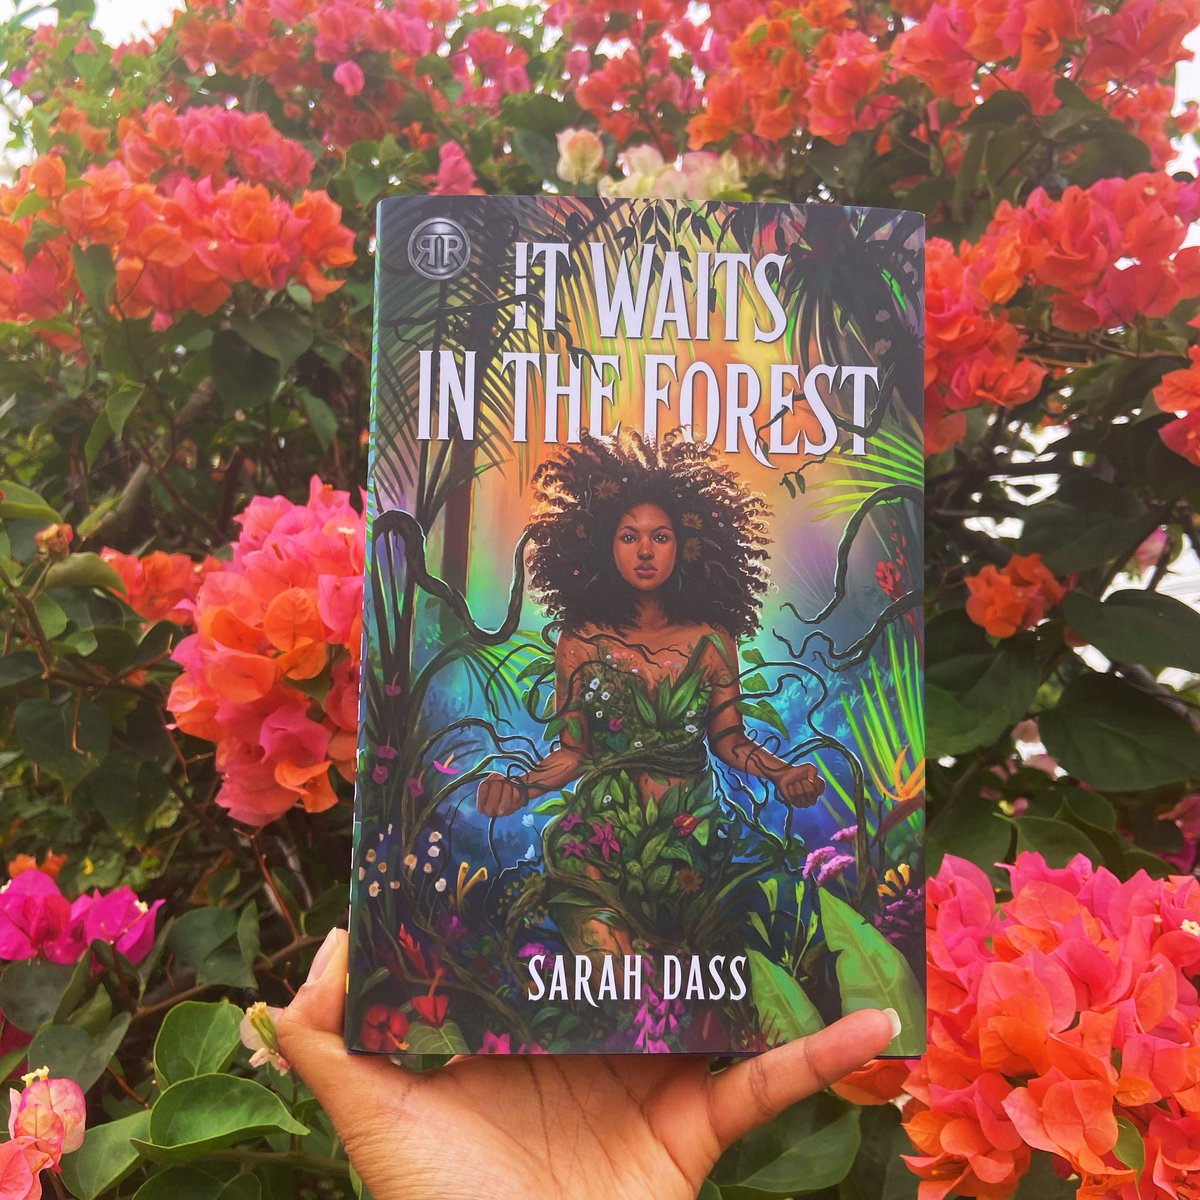 IT WAITS IN THE FOREST is out TODAY!!! A supernatural thriller inspired by Caribbean folklore, about a fake psychic who must team up with her ex-boyfriend to investigate a string of strange murders. Writing this book has been a joy and a challenge. I hope you enjoy it!